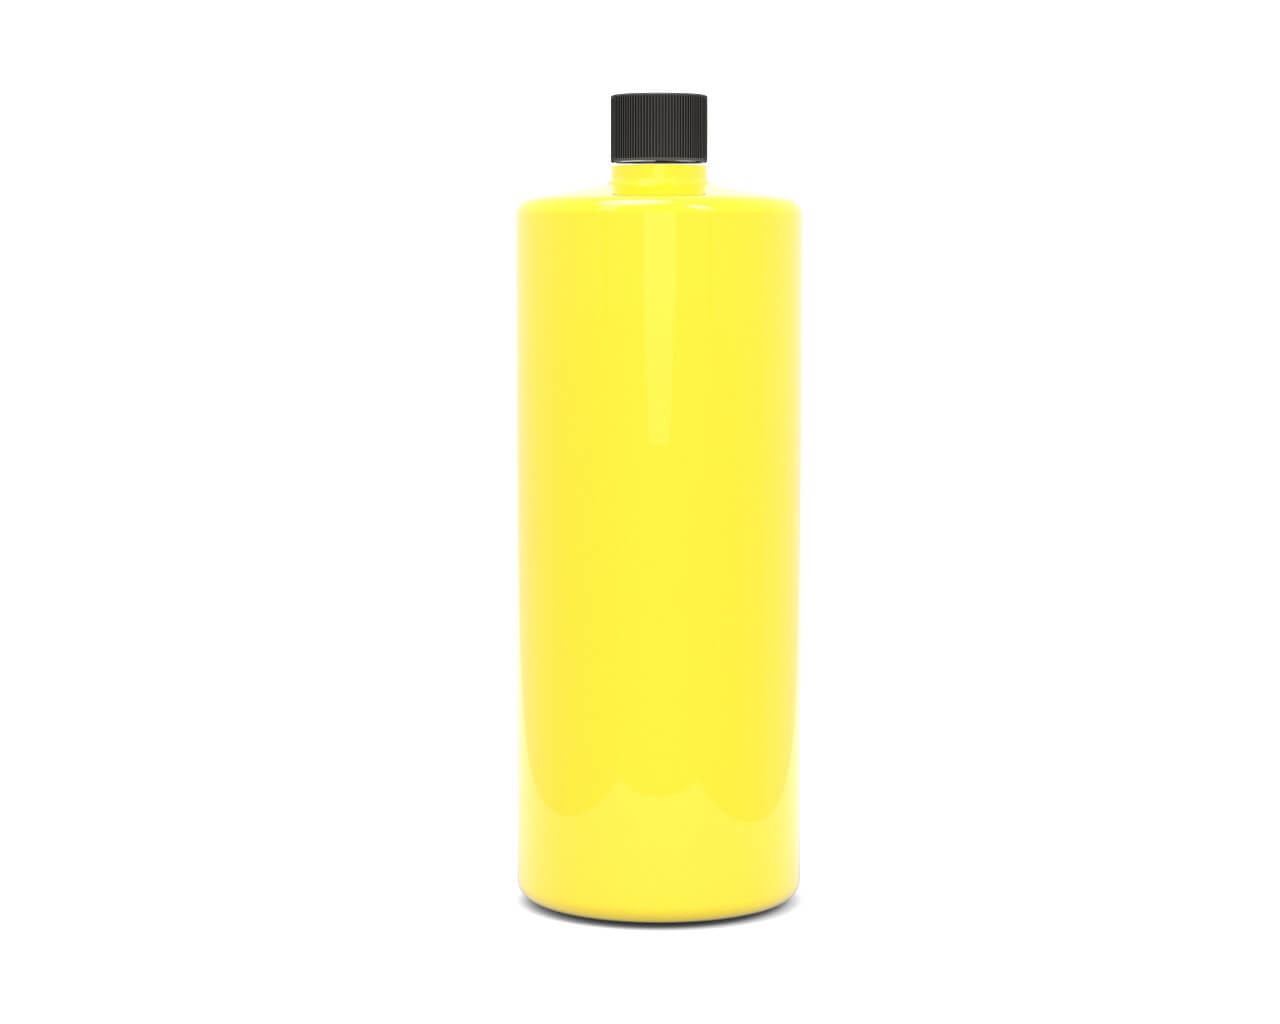 PrimoChill Opaque - Pre-Mix (32oz) - PrimoChill - KEEPING IT COOL Yellow